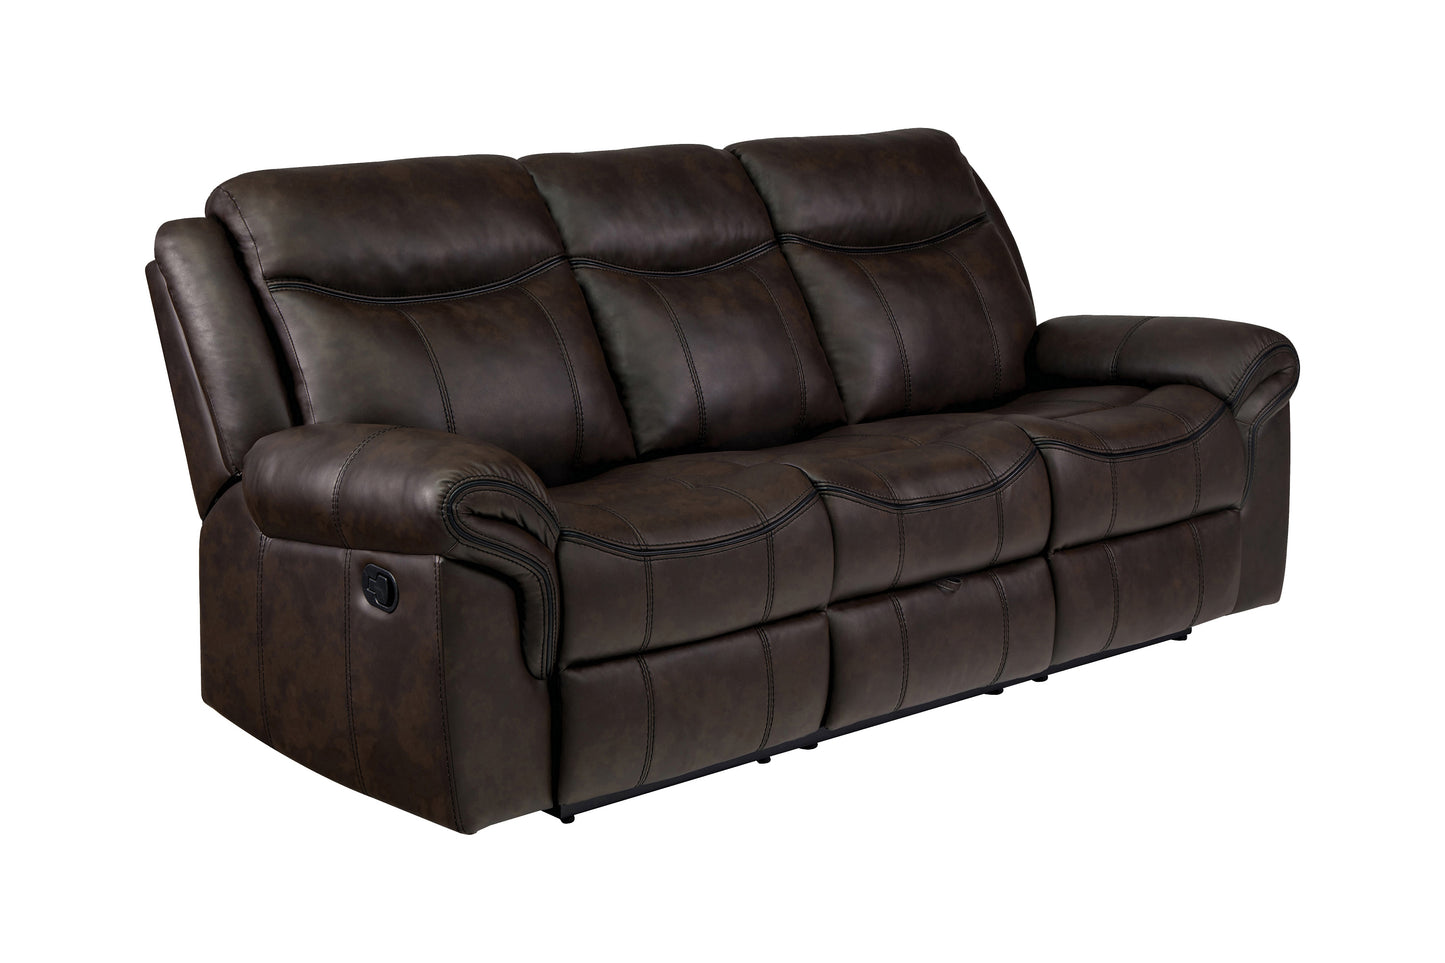 Sawyer Upholstered Tufted Living Room Set Cocoa Brown - 602331